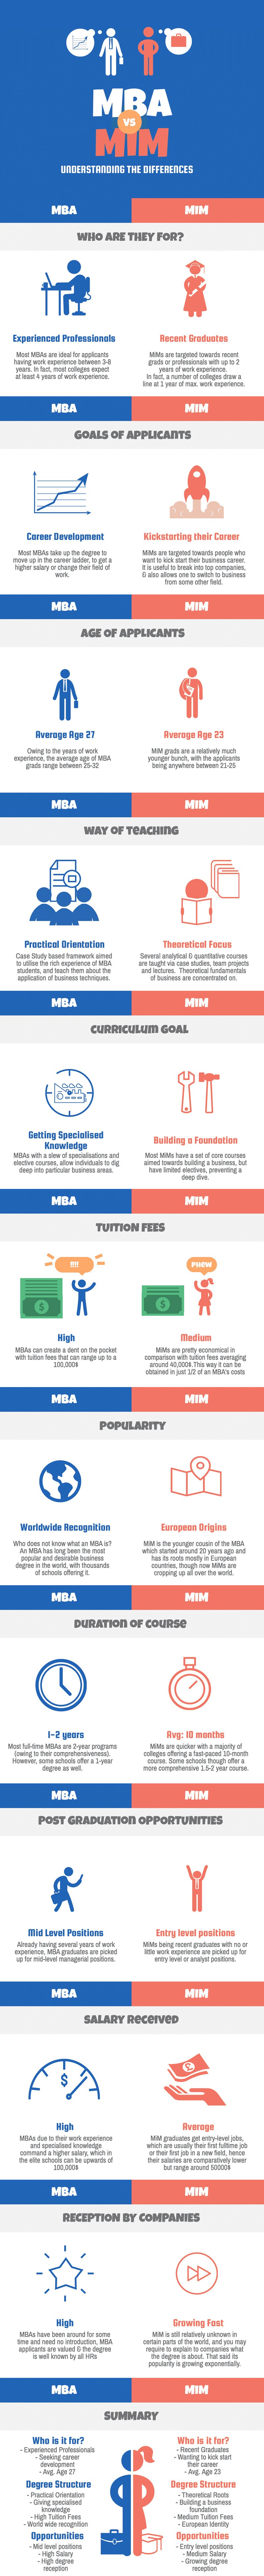 MBA vs Masters in Management Infographic